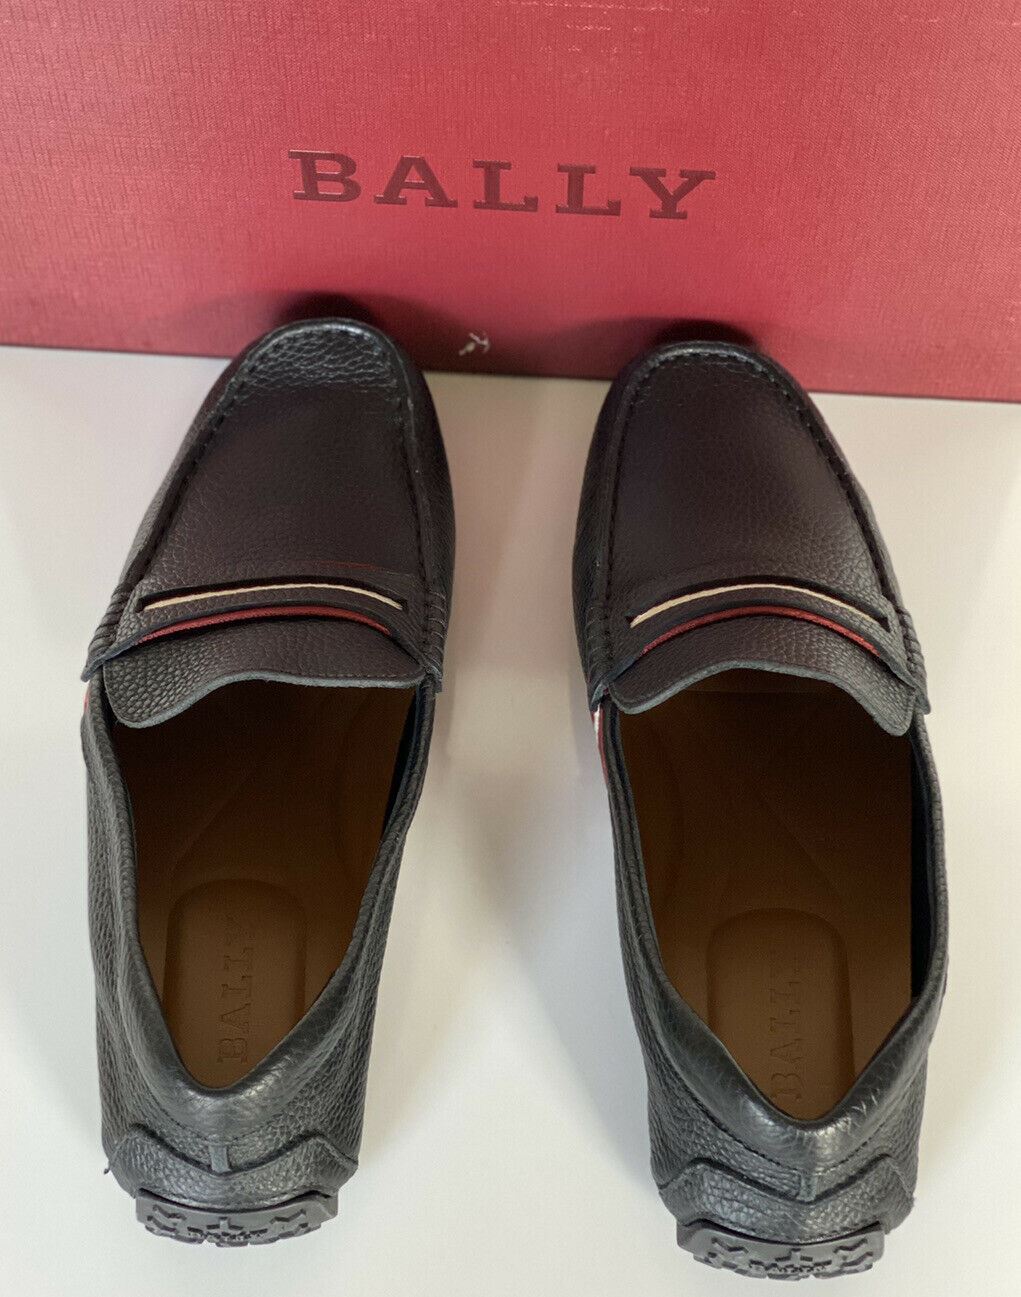 NIB Bally Mens Bovine Grained Leather Driver Shoes Black 12 D US 6228298 Italy